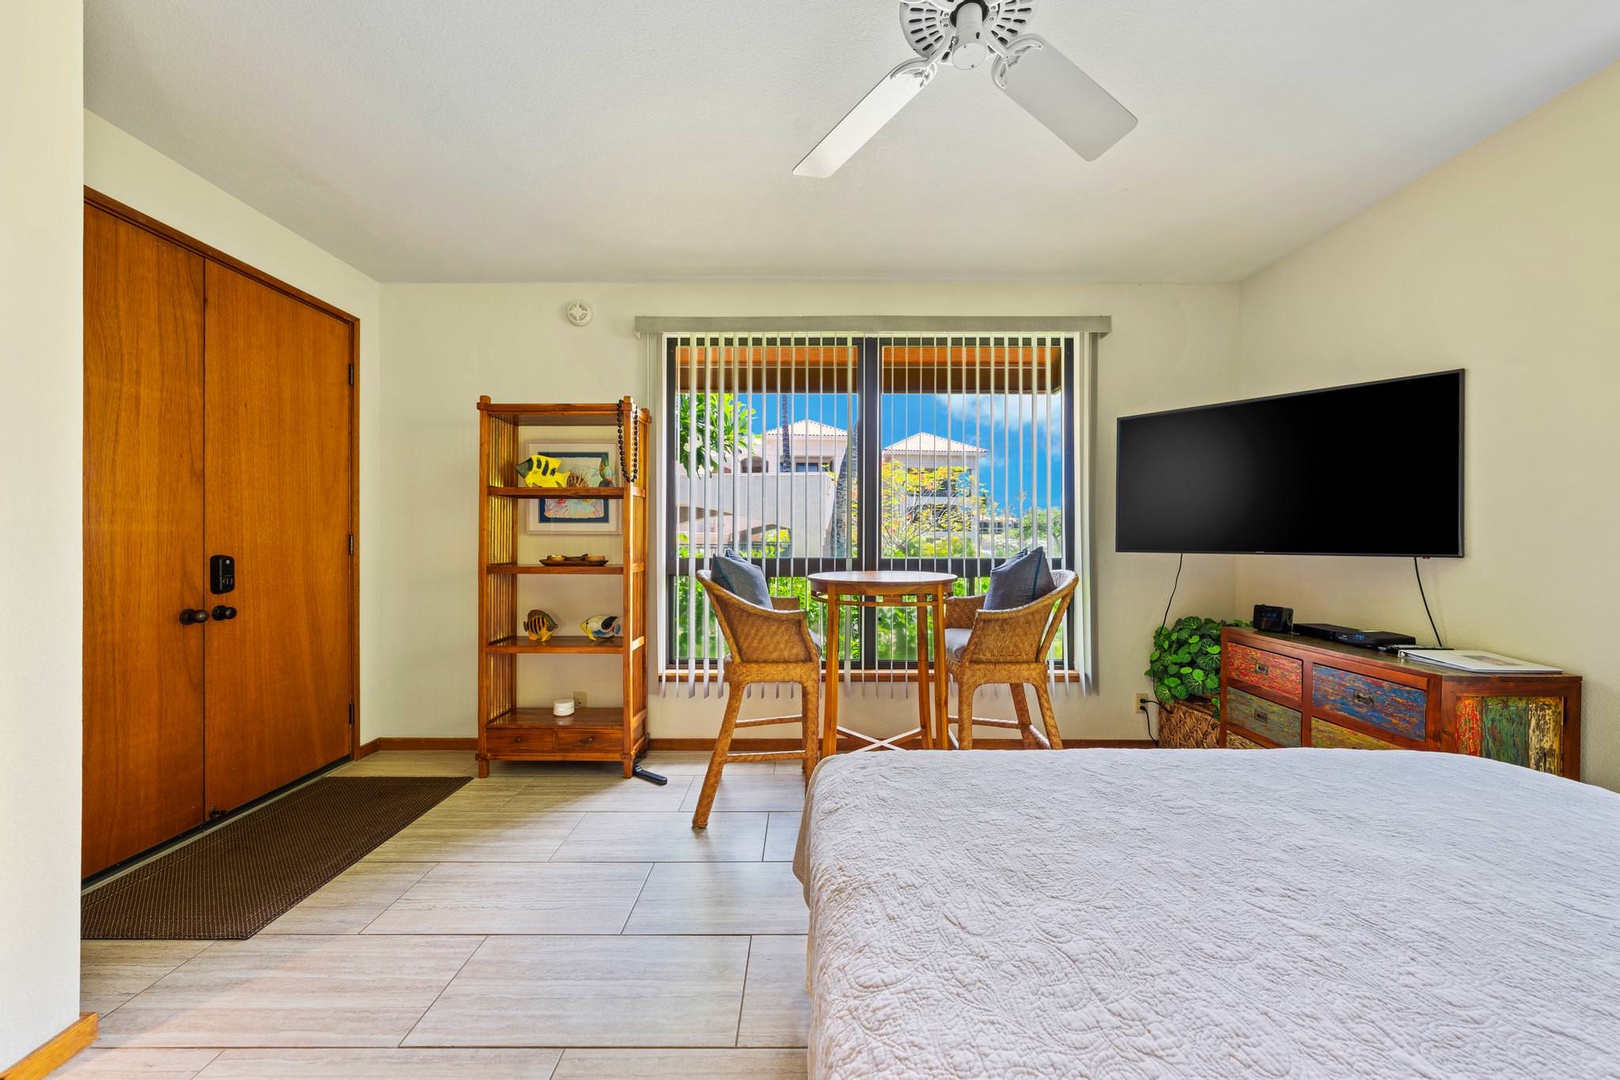 Tropical studio with King bed, split system AC, 50" Smart TV